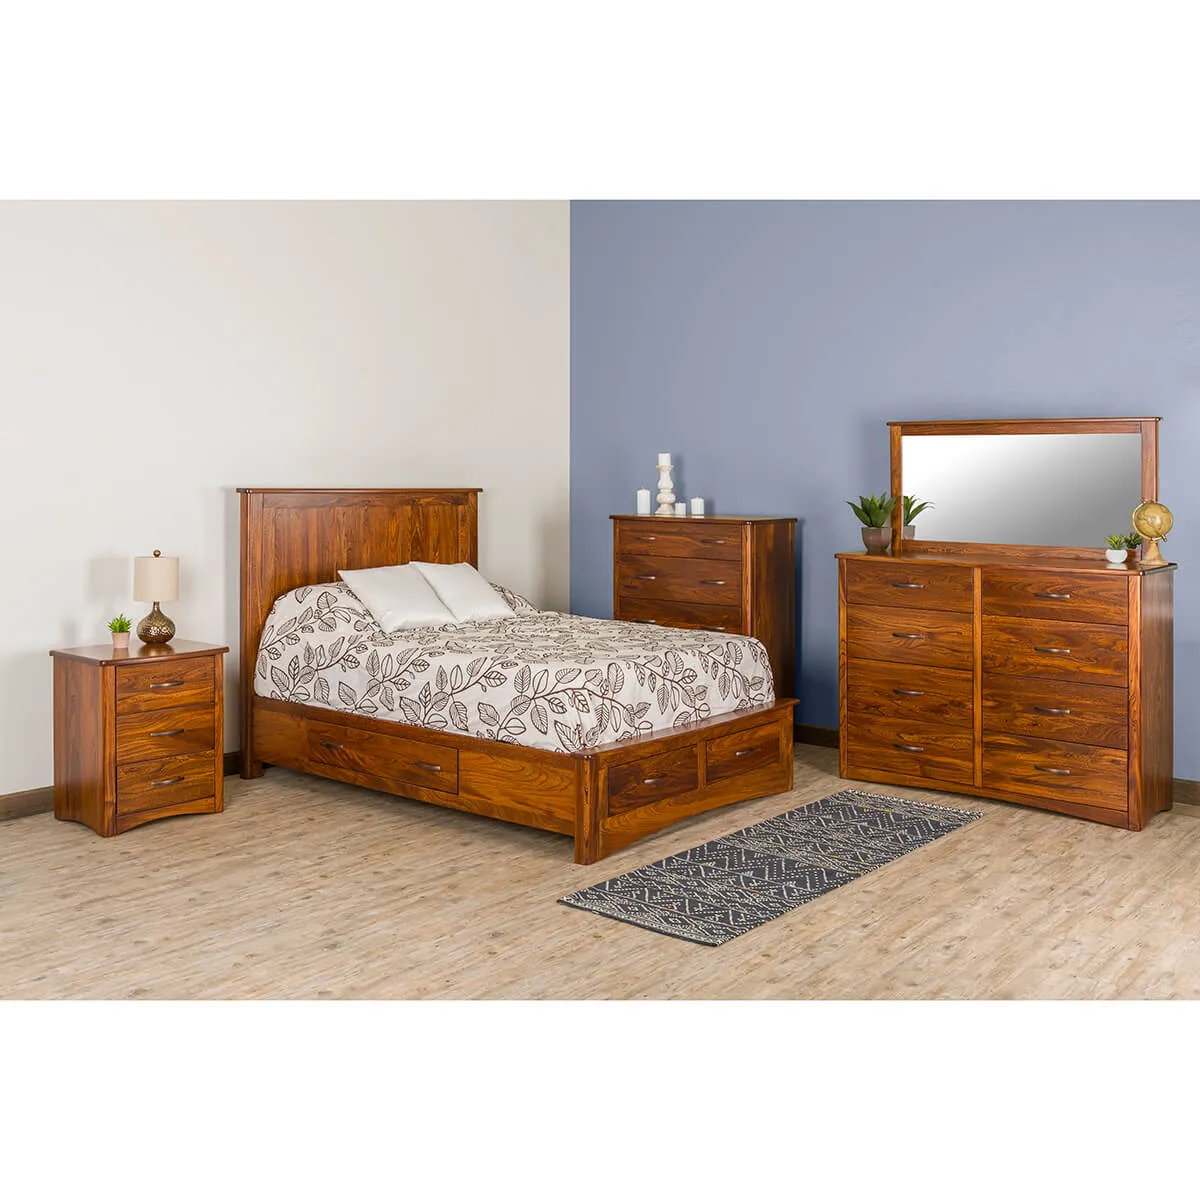 Carrington Bedroom Collection